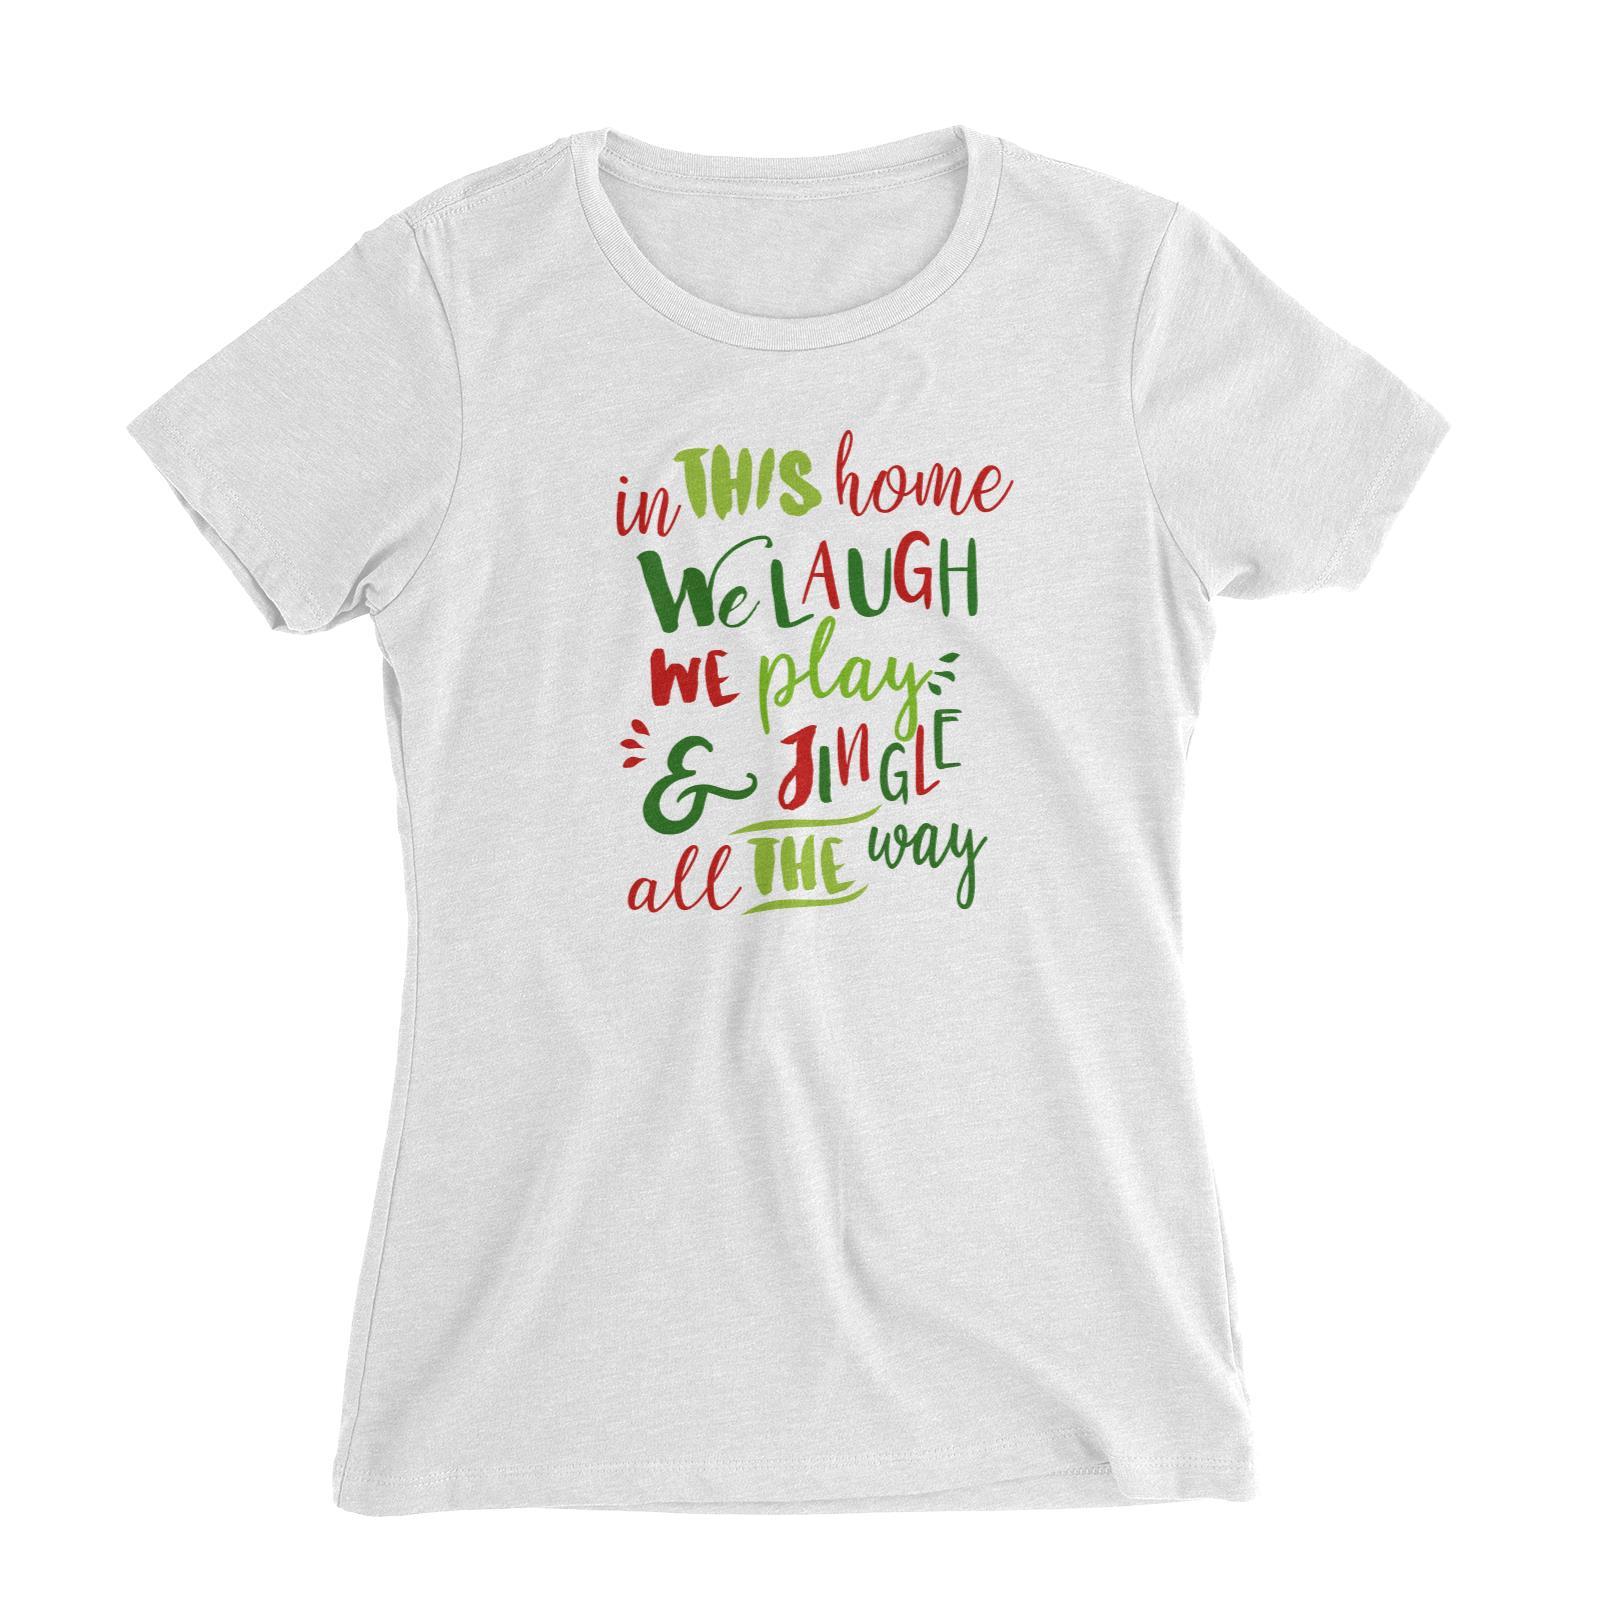 In This Home We Laugh, We Play & Jingle All The Way Lettering Women's Slim Fit T-Shirt Christmas Matching Family